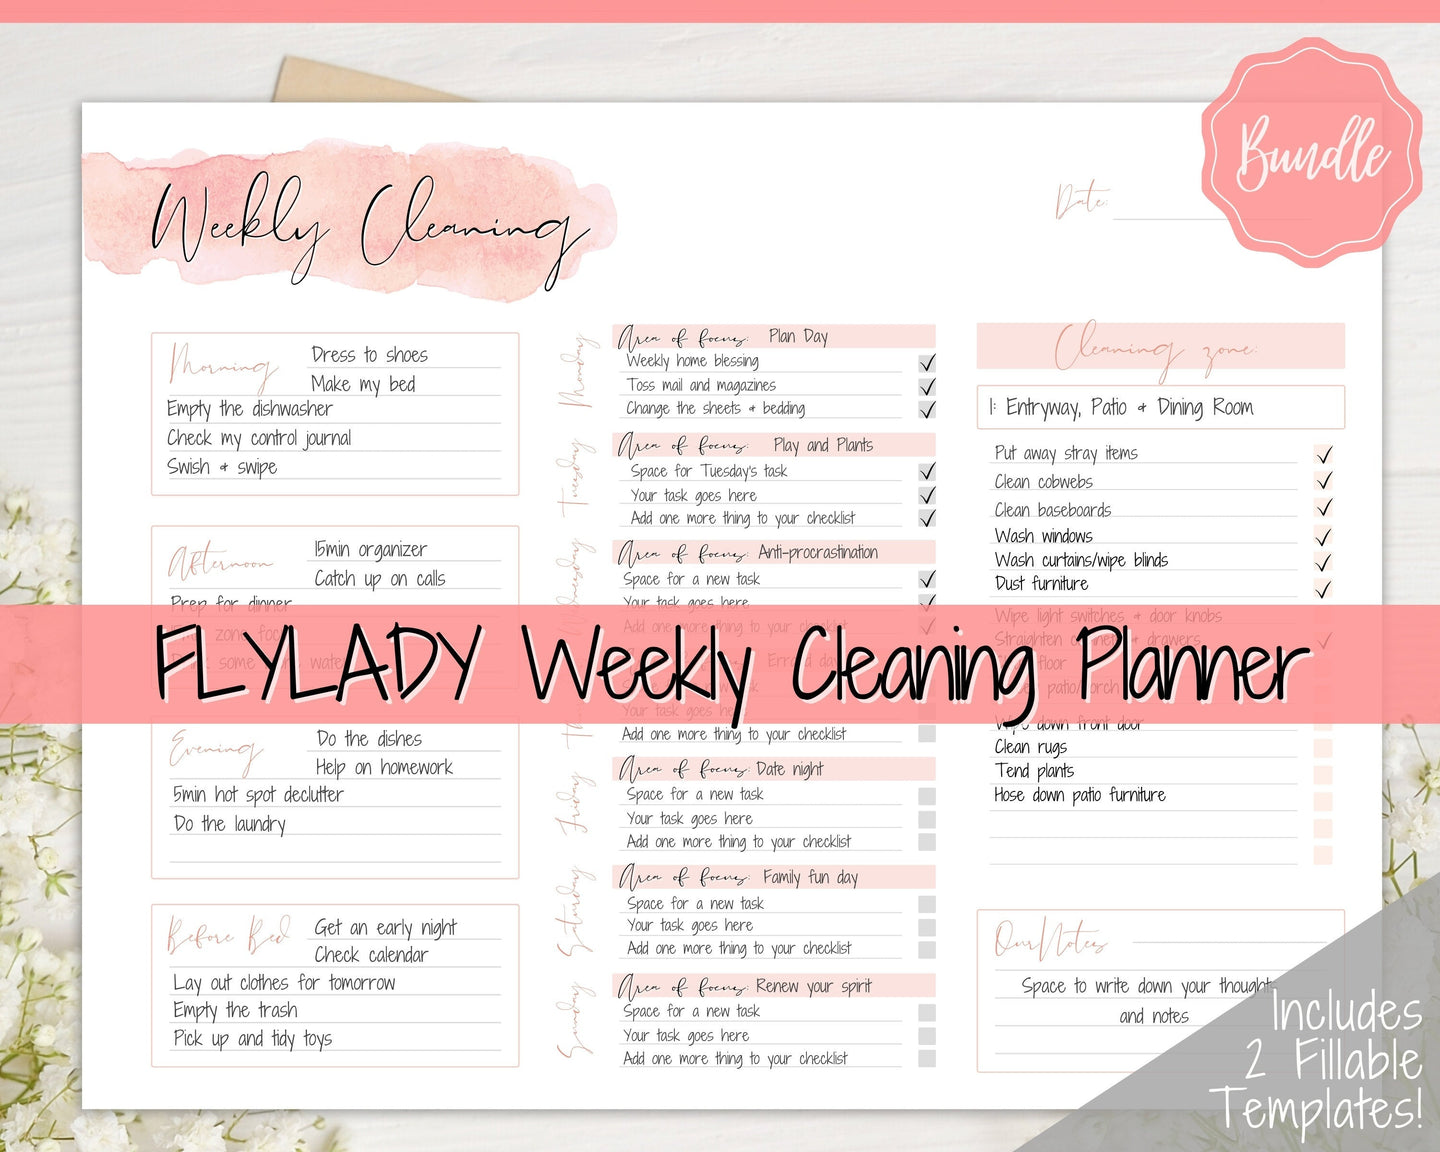 EDITABLE Cleaning Schedule, FLYLADY Daily Routine, Cleaning Checklist, Cleaning Planner, Weekly House Chore, Control Journal, Fly Lady Zones | Landscape & Portrait - Pink